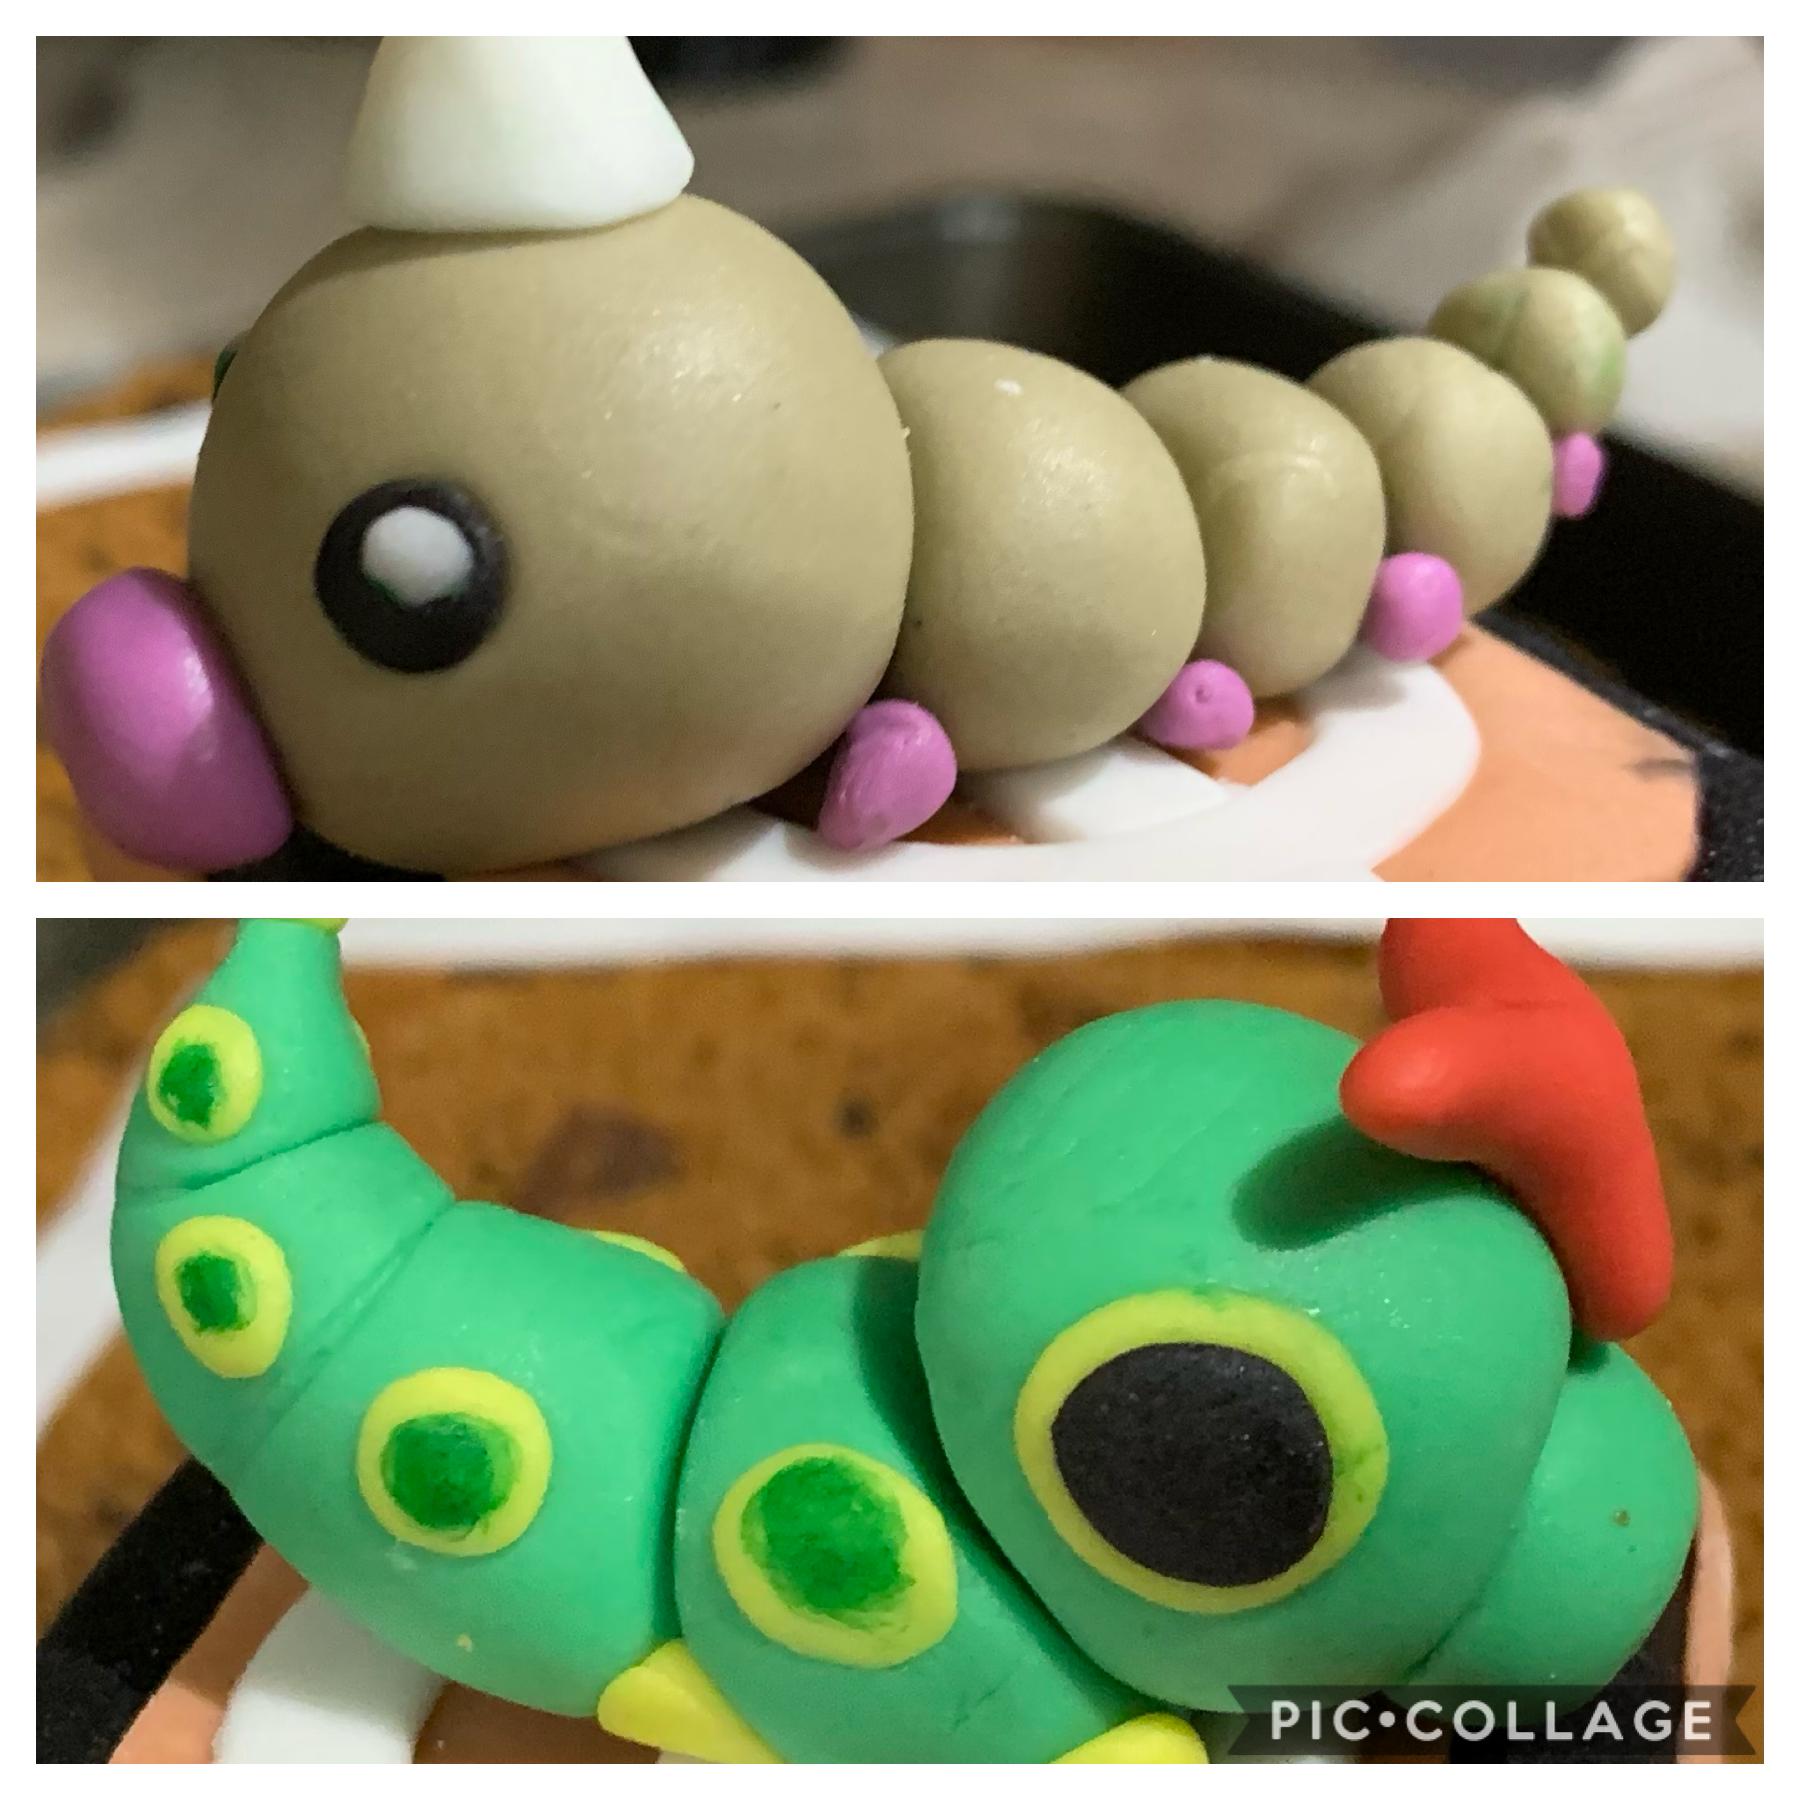 I made these teeny tiny Pokémon toppers for a cake